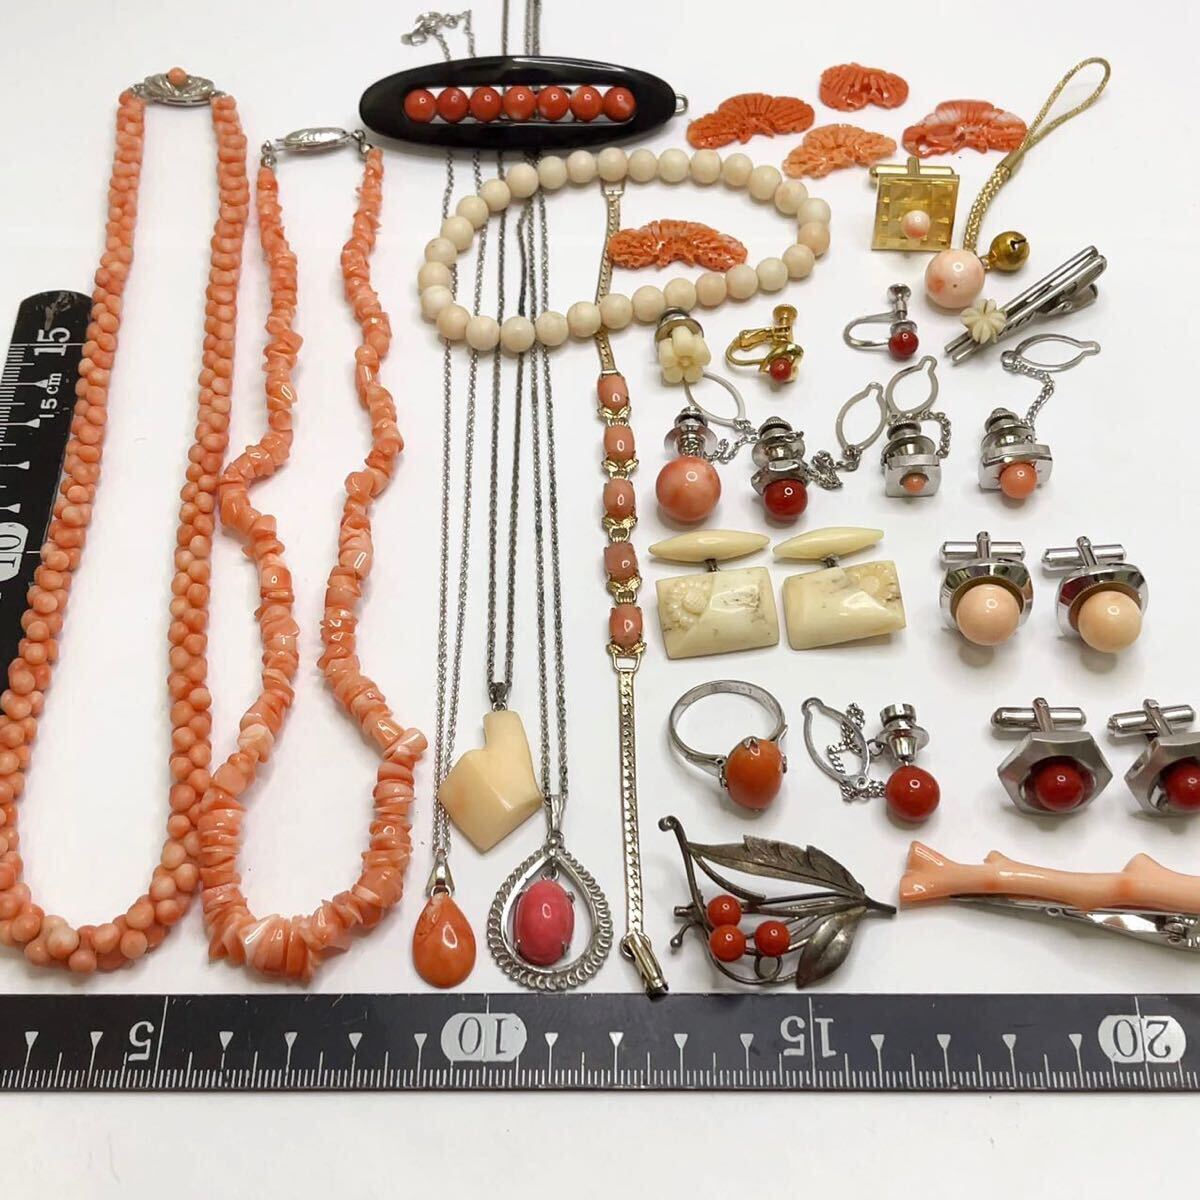 1 jpy natural ... sphere .. loose coral accessory large amount together necklace brooch ring hair clip bracele etc. SILVER stamp contains 